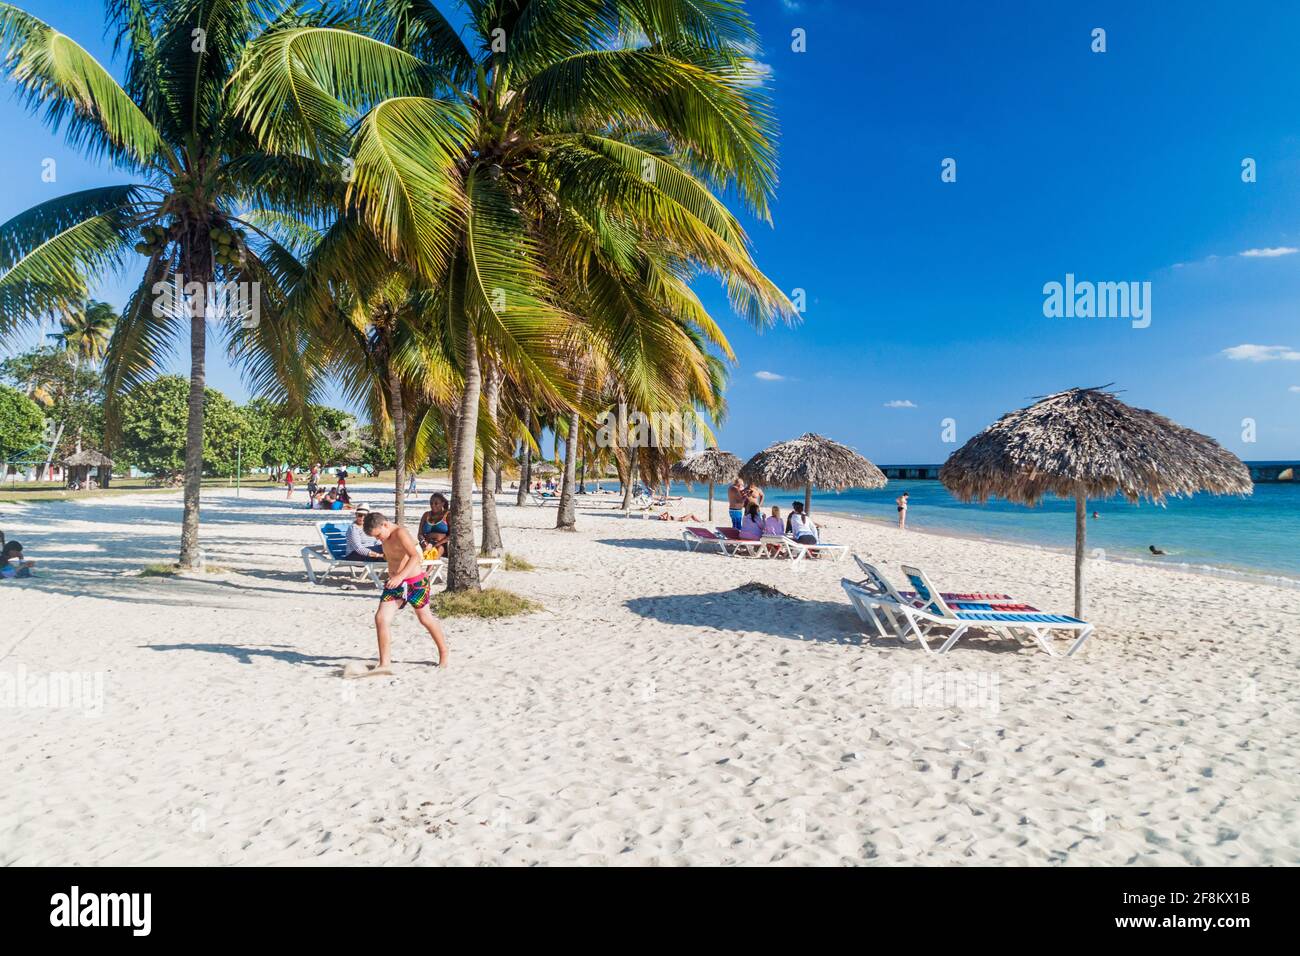 PLAYA GIRON, CUBA - FEB 14, 2016: Tourists at the beach Playa Giron, Cuba. This beach is famous for its role during the Bay of Pigs invasion. Stock Photo